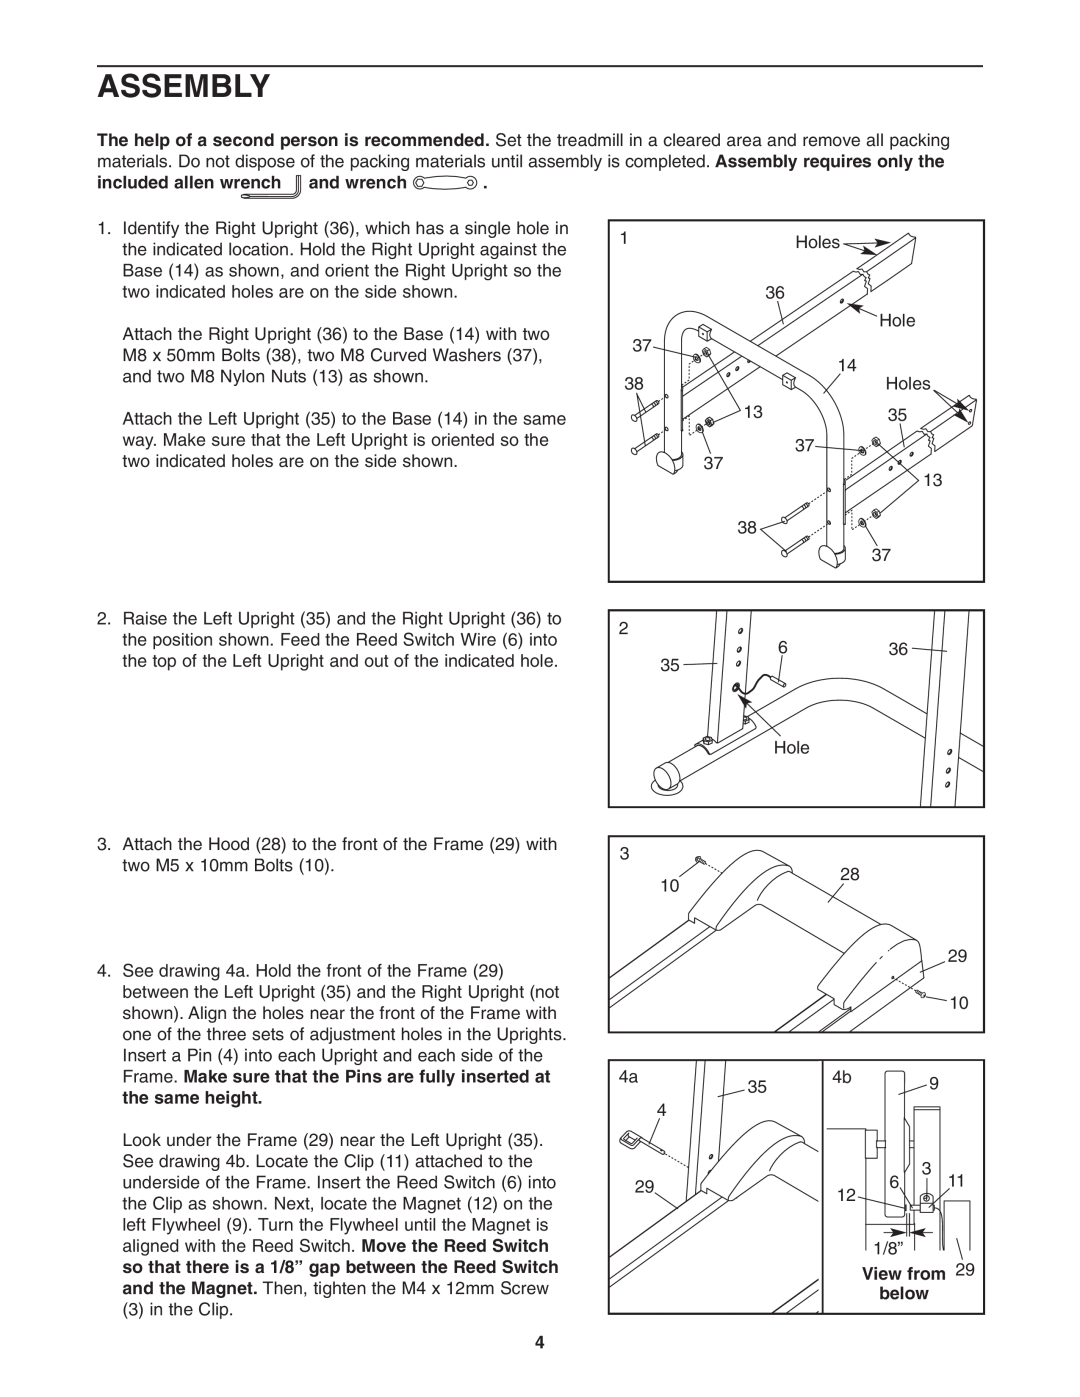 Weslo 831.291030 user manual Assembly, included allen wrench and wrench, View from 29 below 